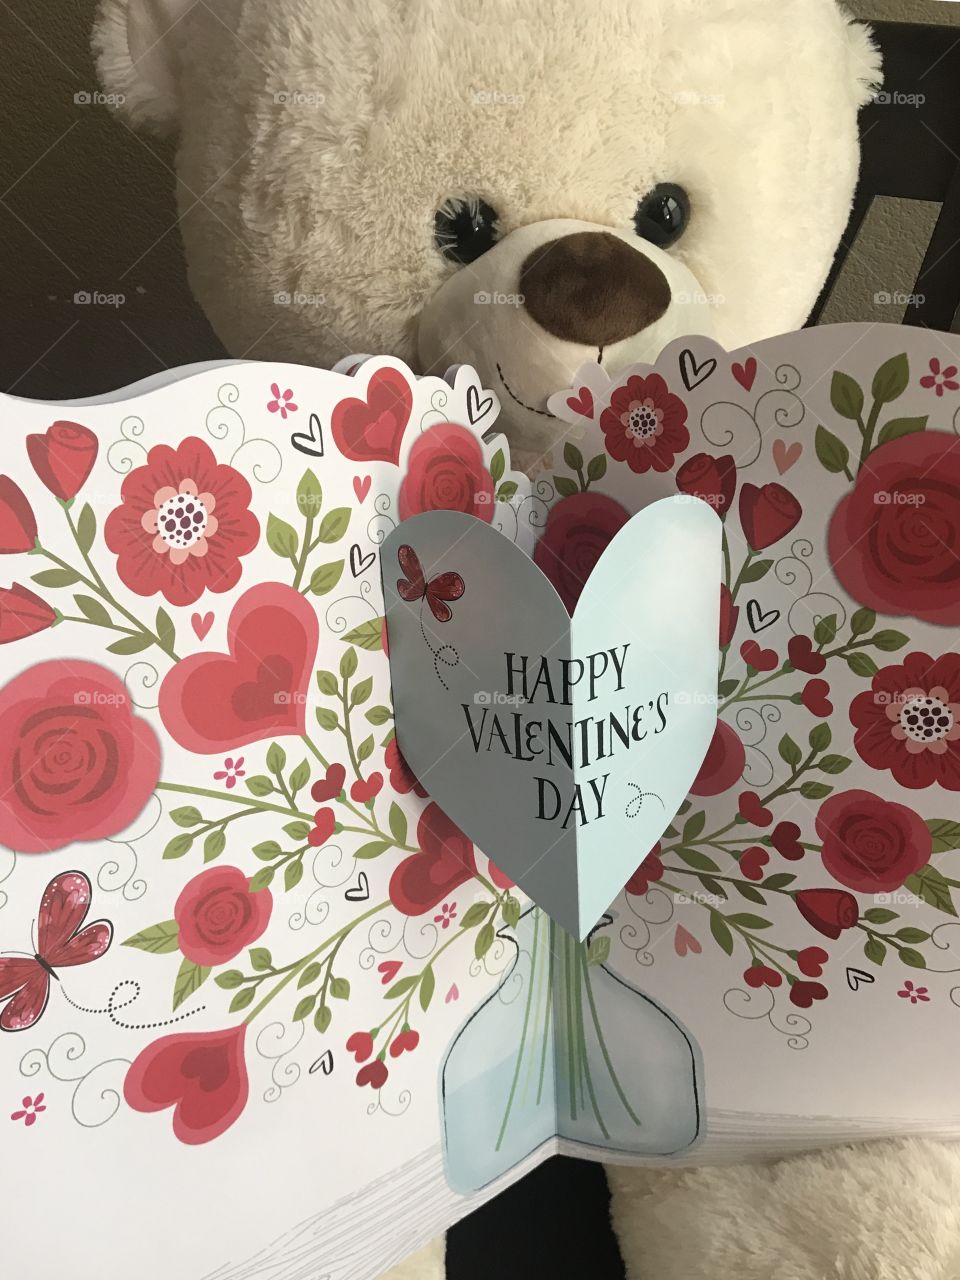 In celebration of Valentine’s Day a cute cuddle Lee Valentines bear holding a Valentines card of flowers and hearts. USA, America 